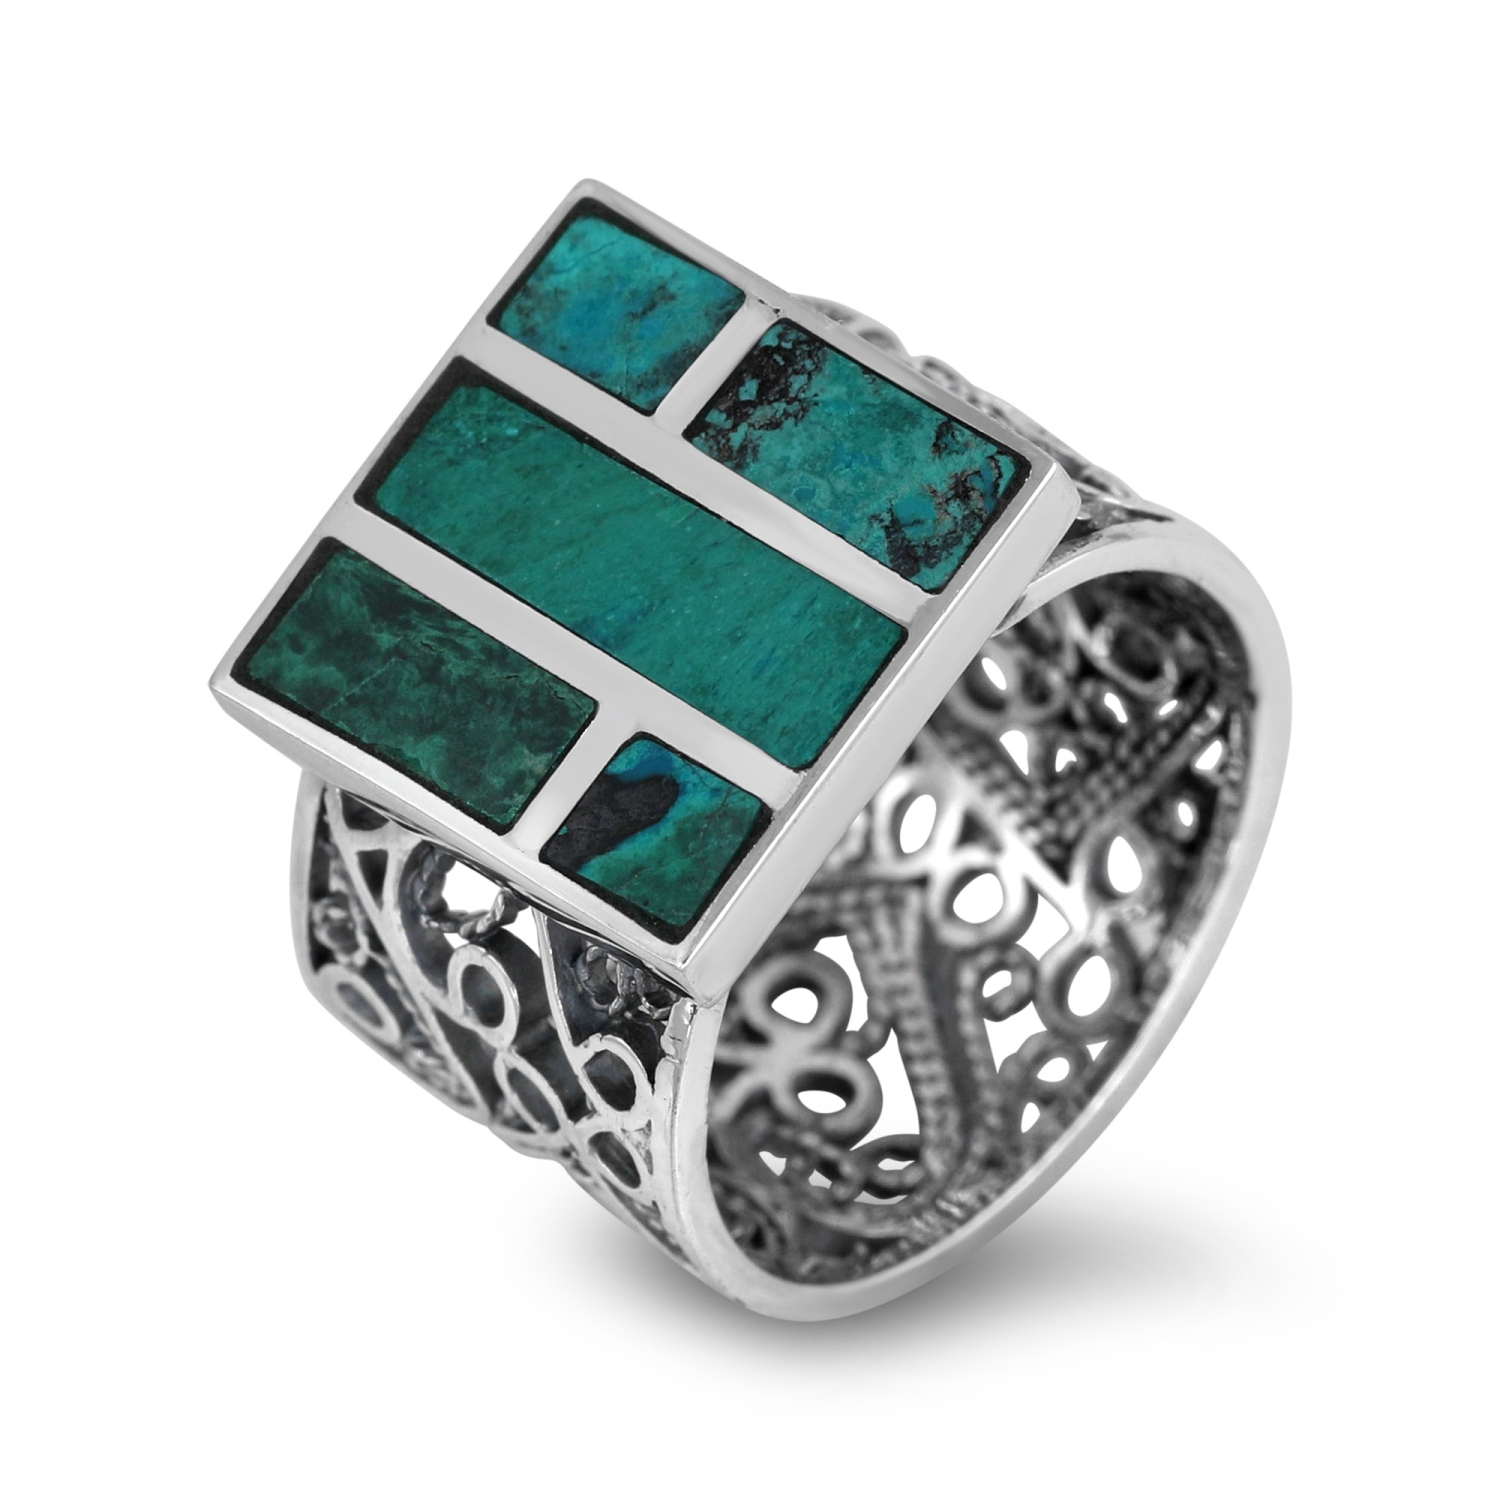 Sterling Silver Filigree Ring with Square Grid Eilat Stone - 1